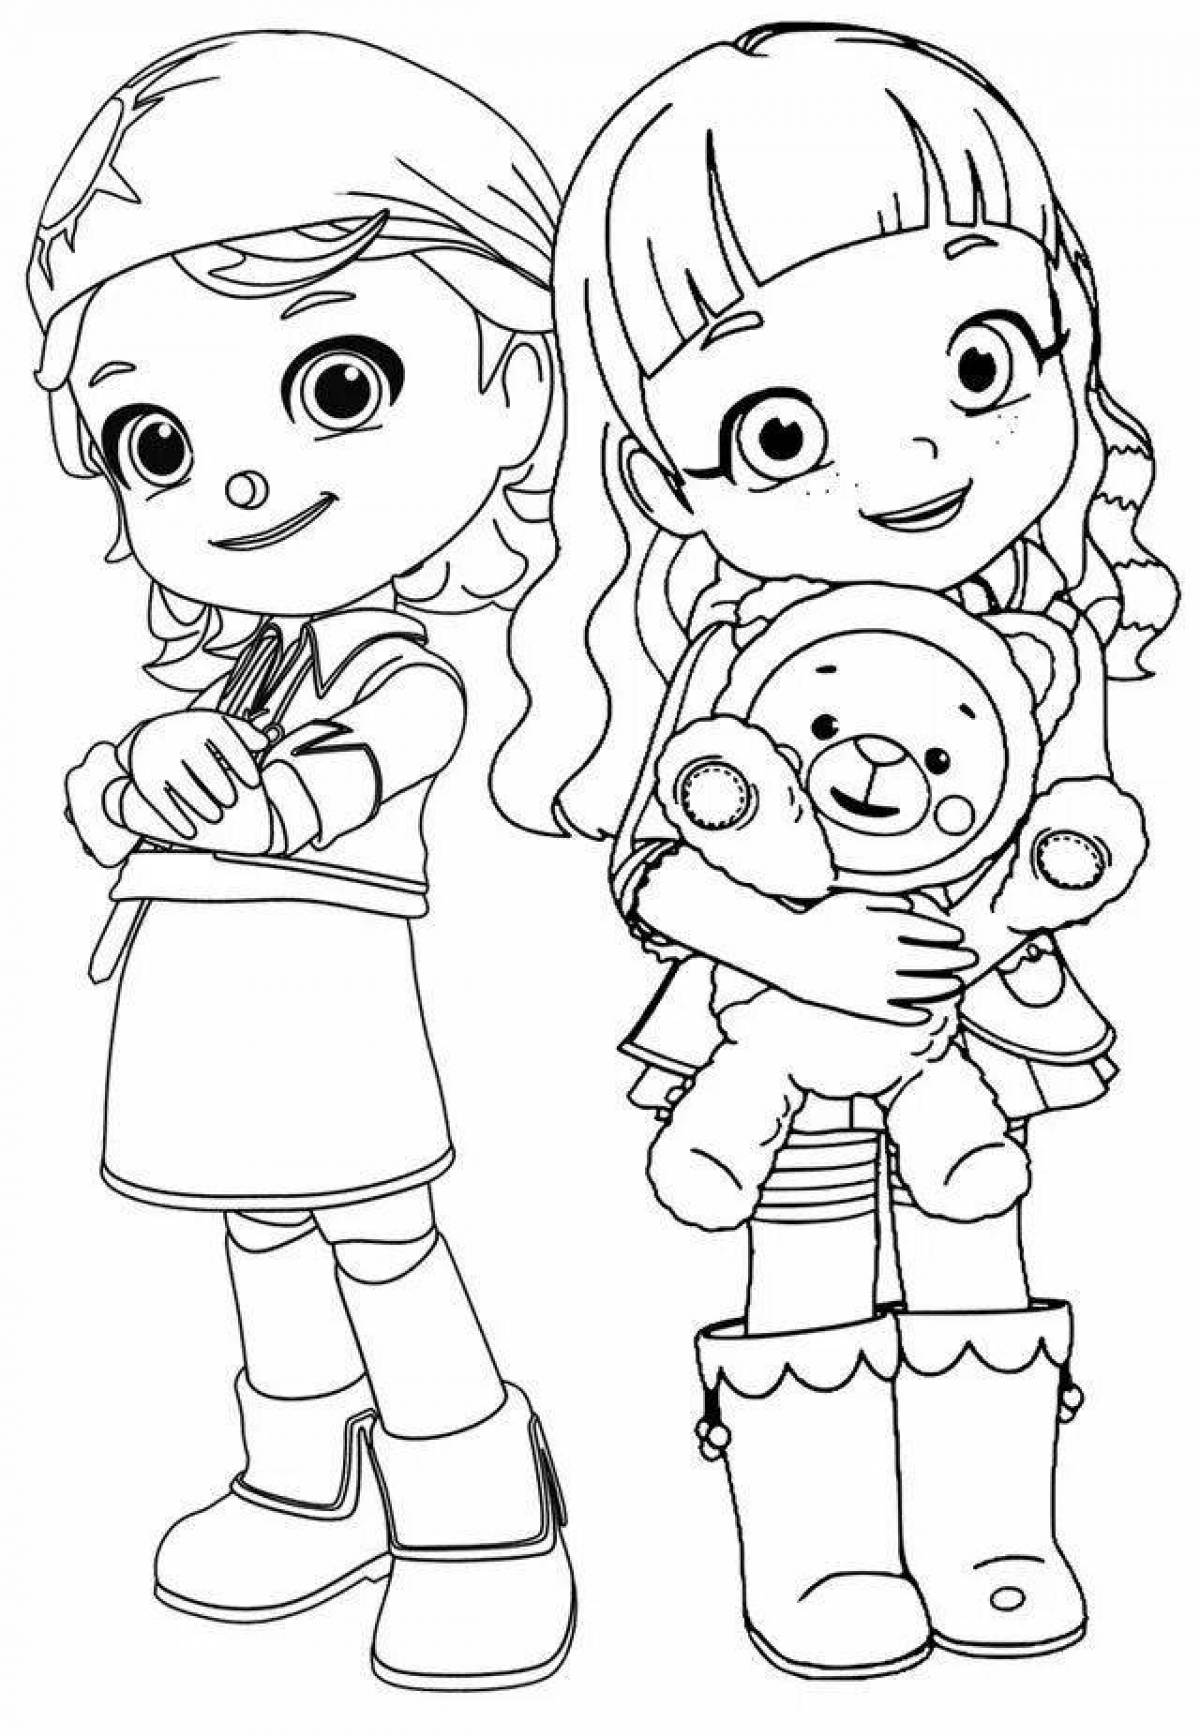 Fabulous coloring pages for girls rainbow friends